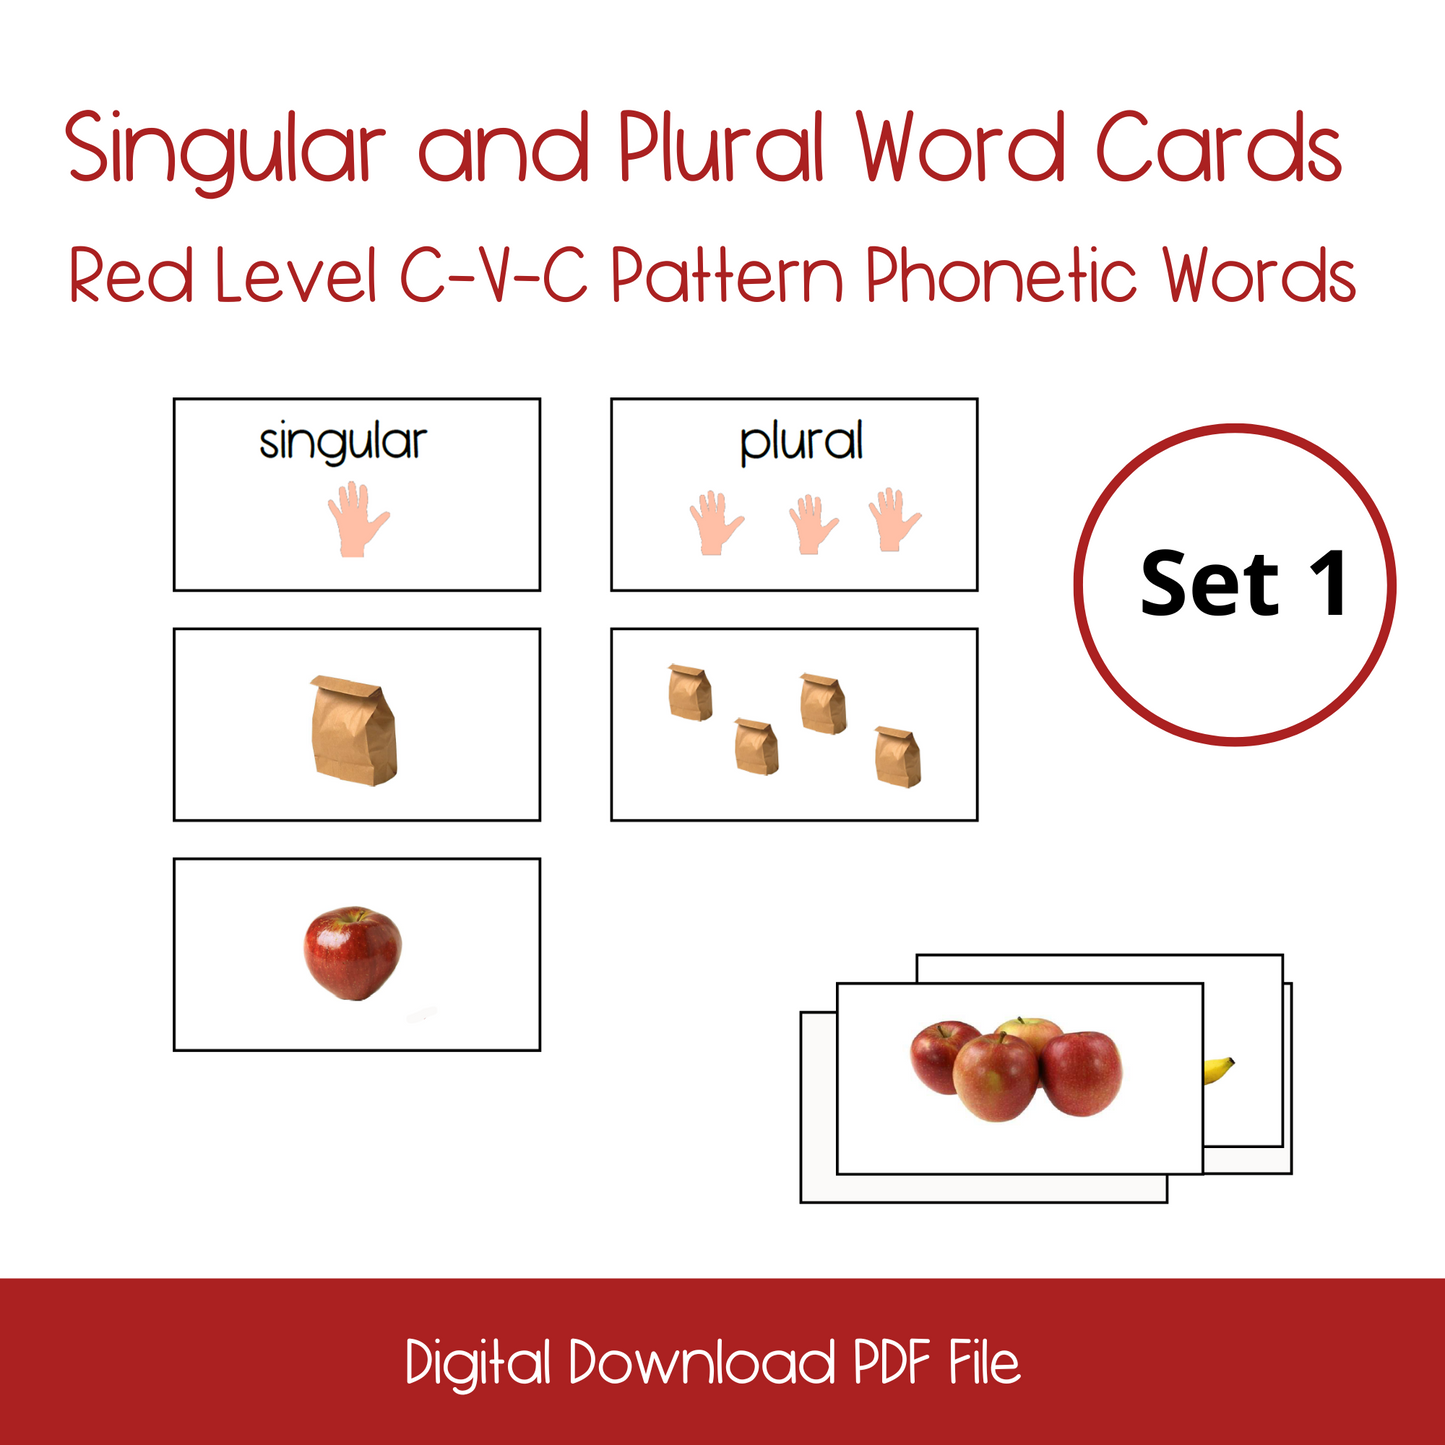 Singular and Plural Cards